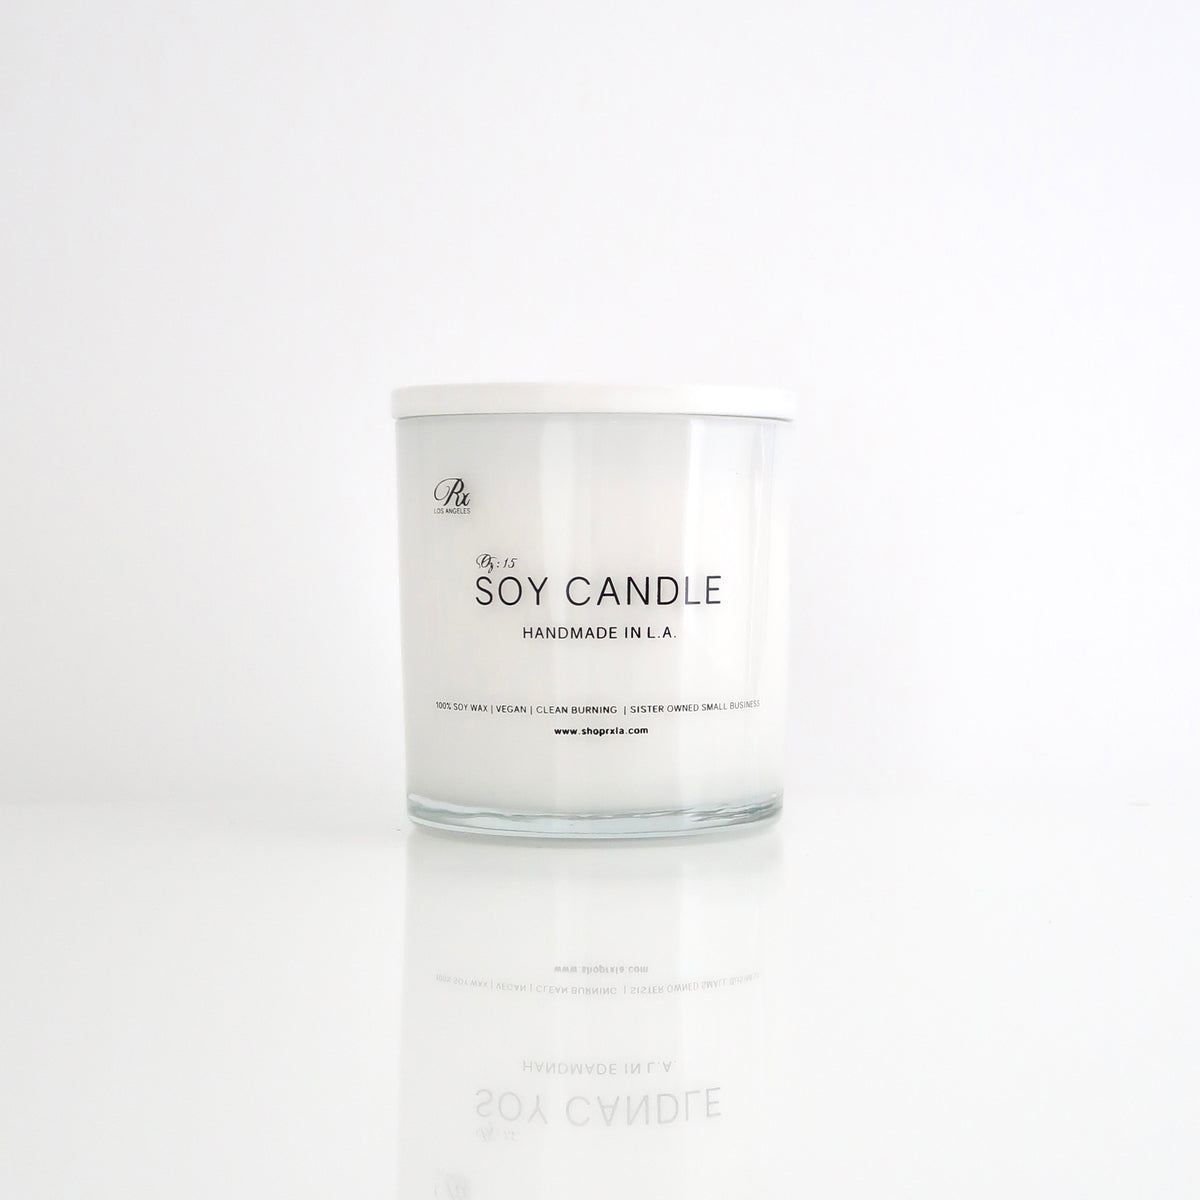 LCO EXCLUSIVE - Woven Double Wick Candle - 13 oz - THELIFESTYLEDCO